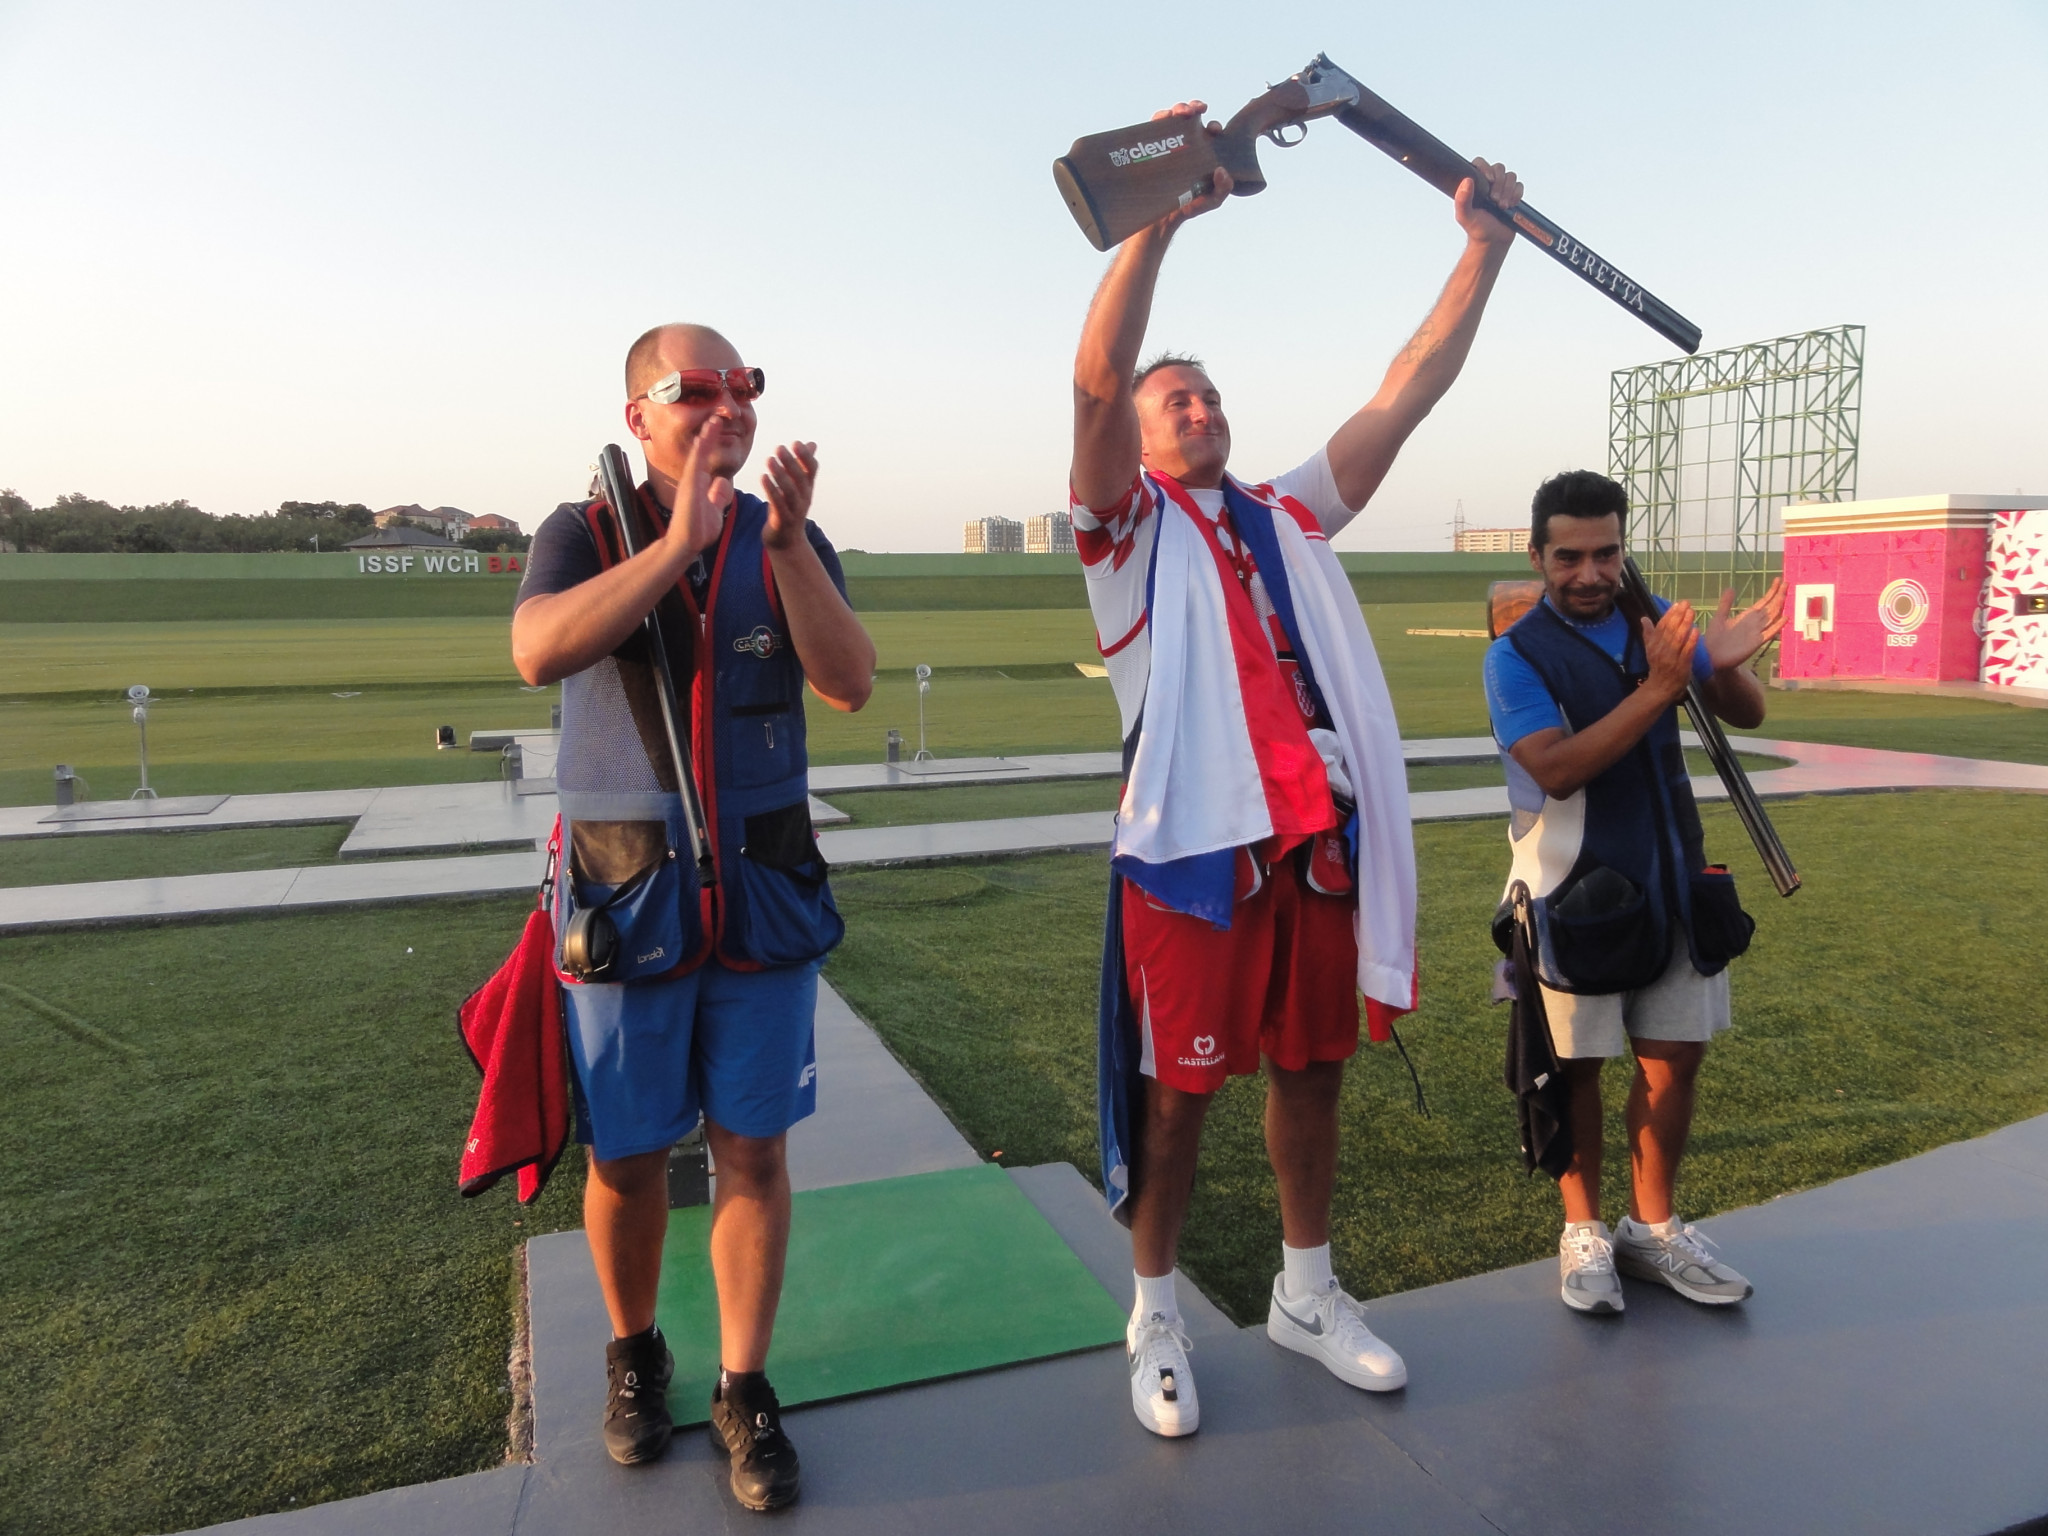 Giovanni Gernogoraz won men's trap gold and a quota place in Baku ©ITG